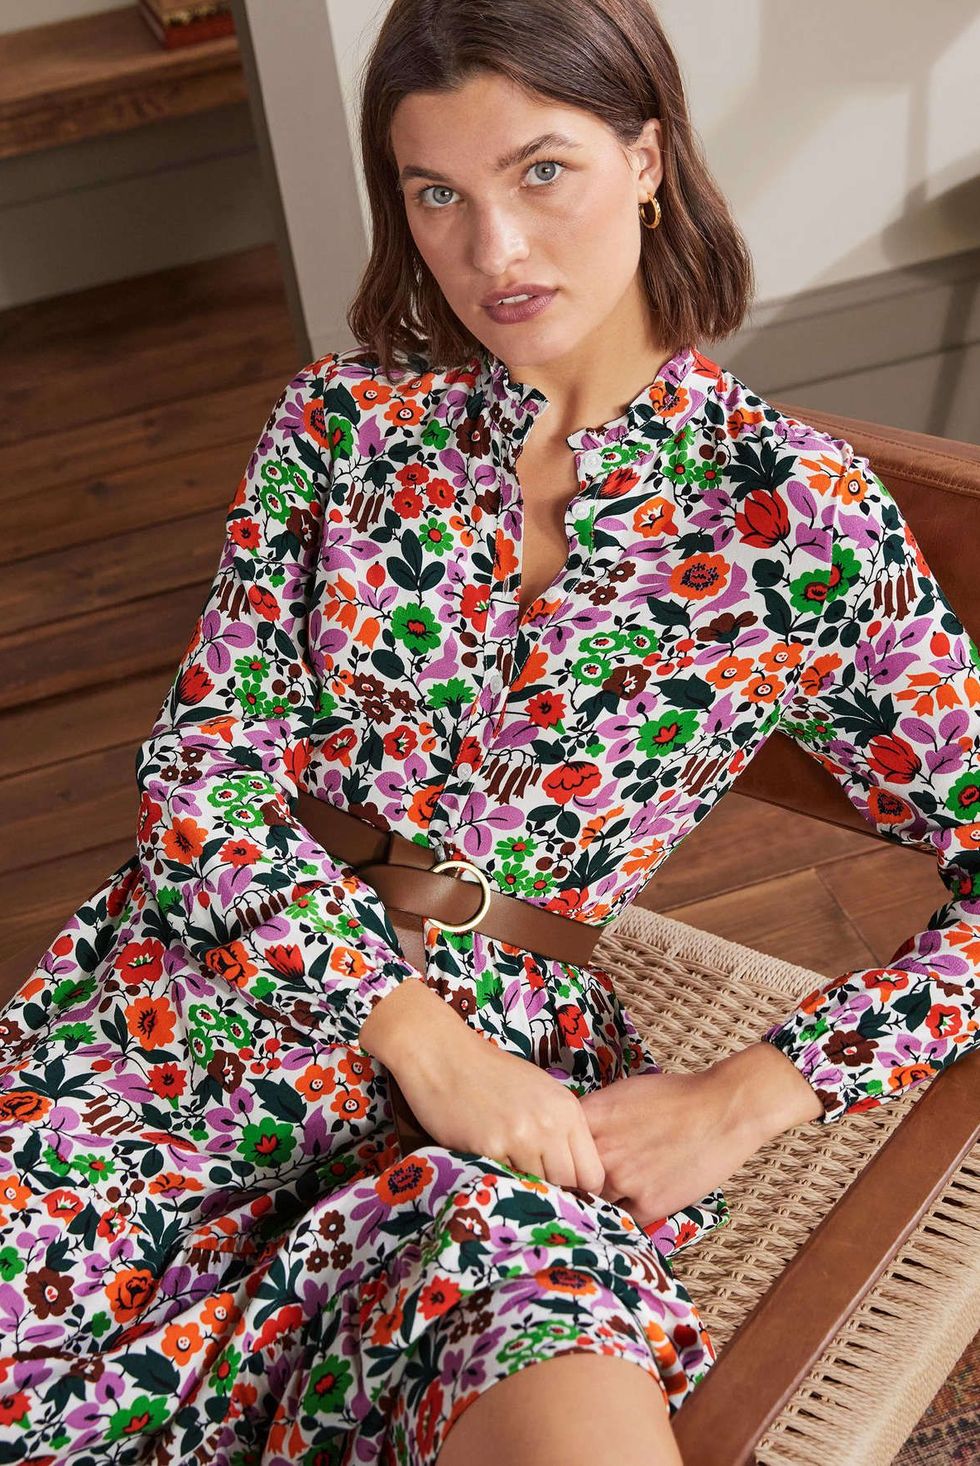 Boden launches 'Best of' Boden capsule collection of bestsellers